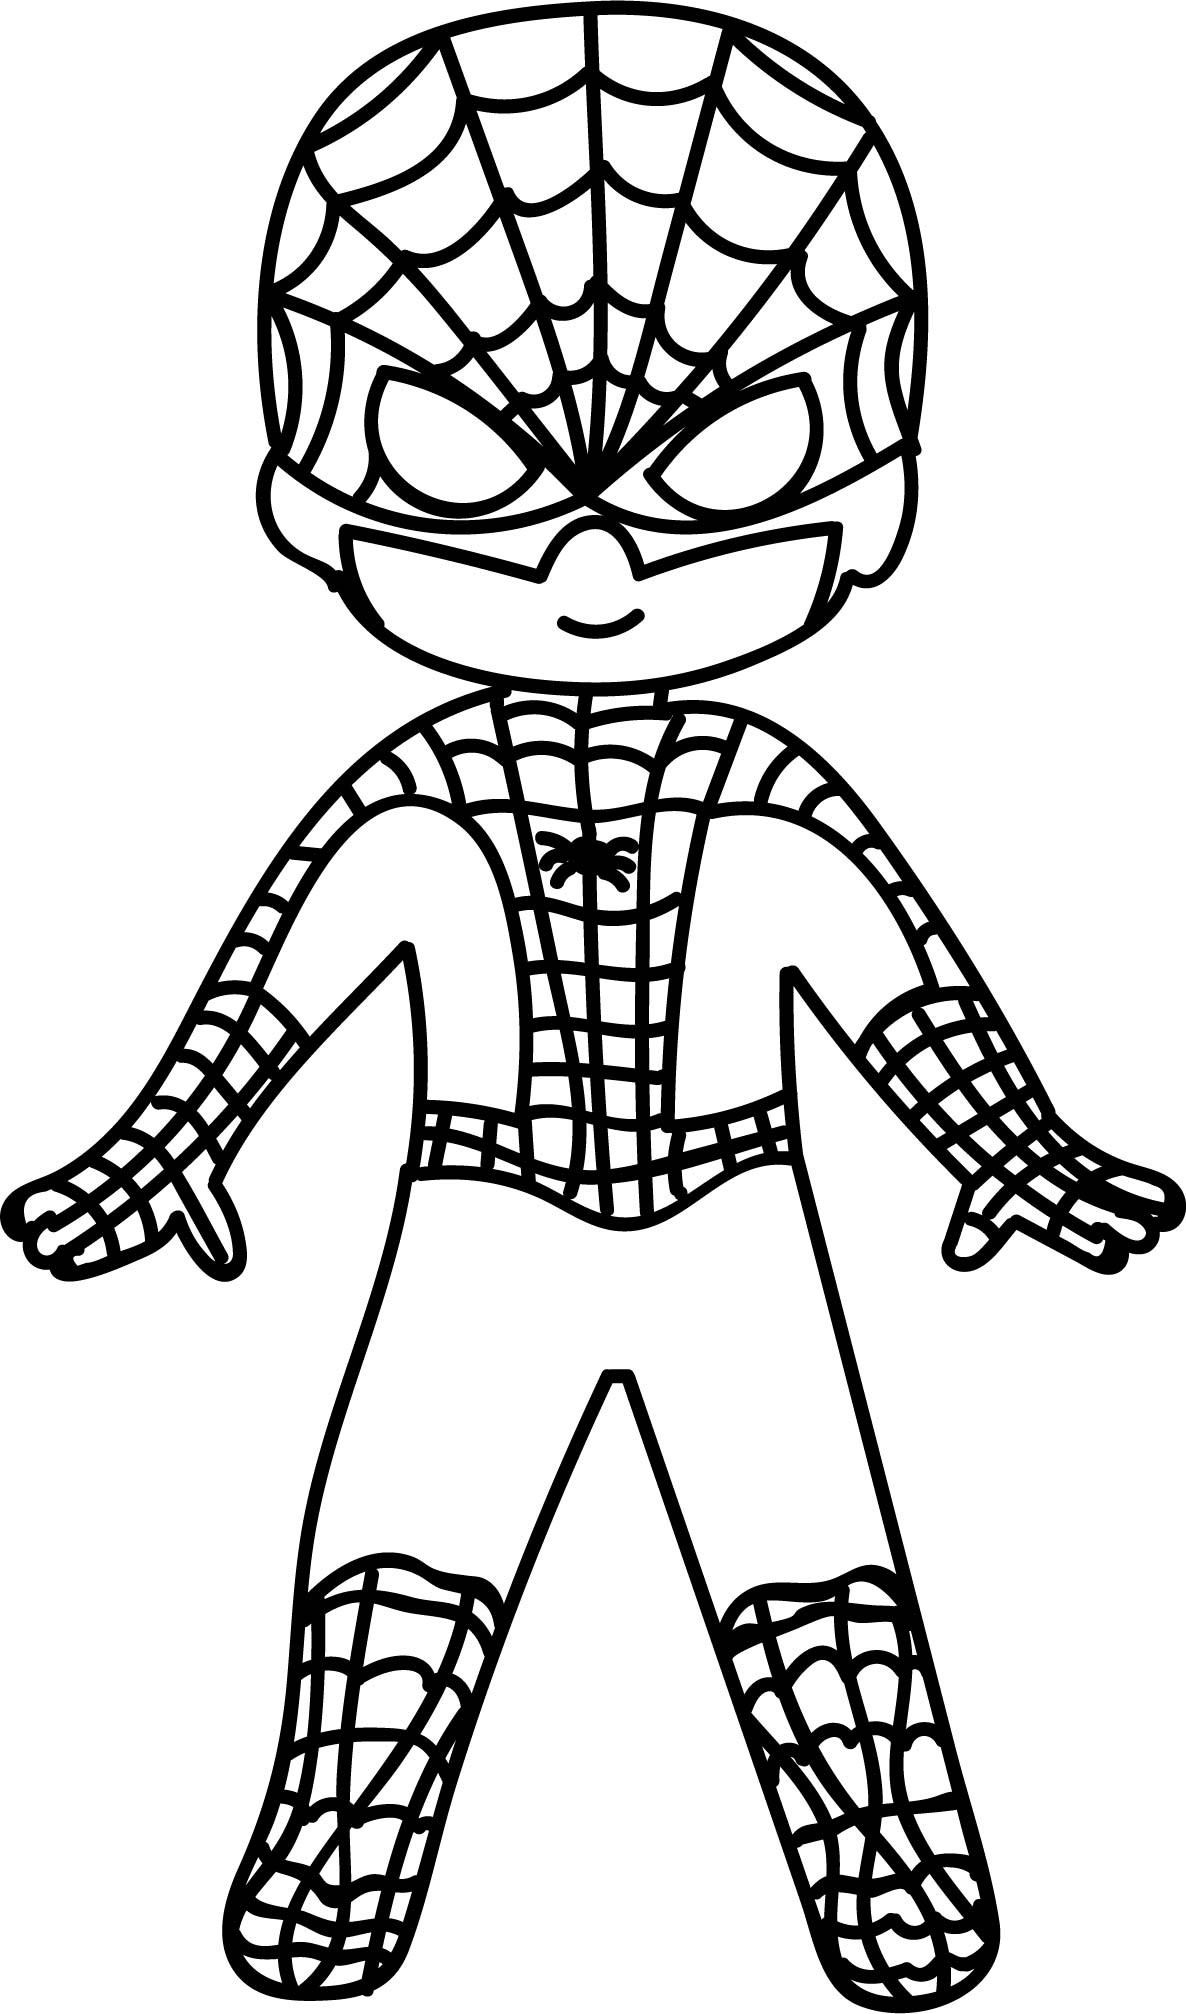 The 21 Best Ideas for Spiderman Coloring Pages for Kids Home, Family